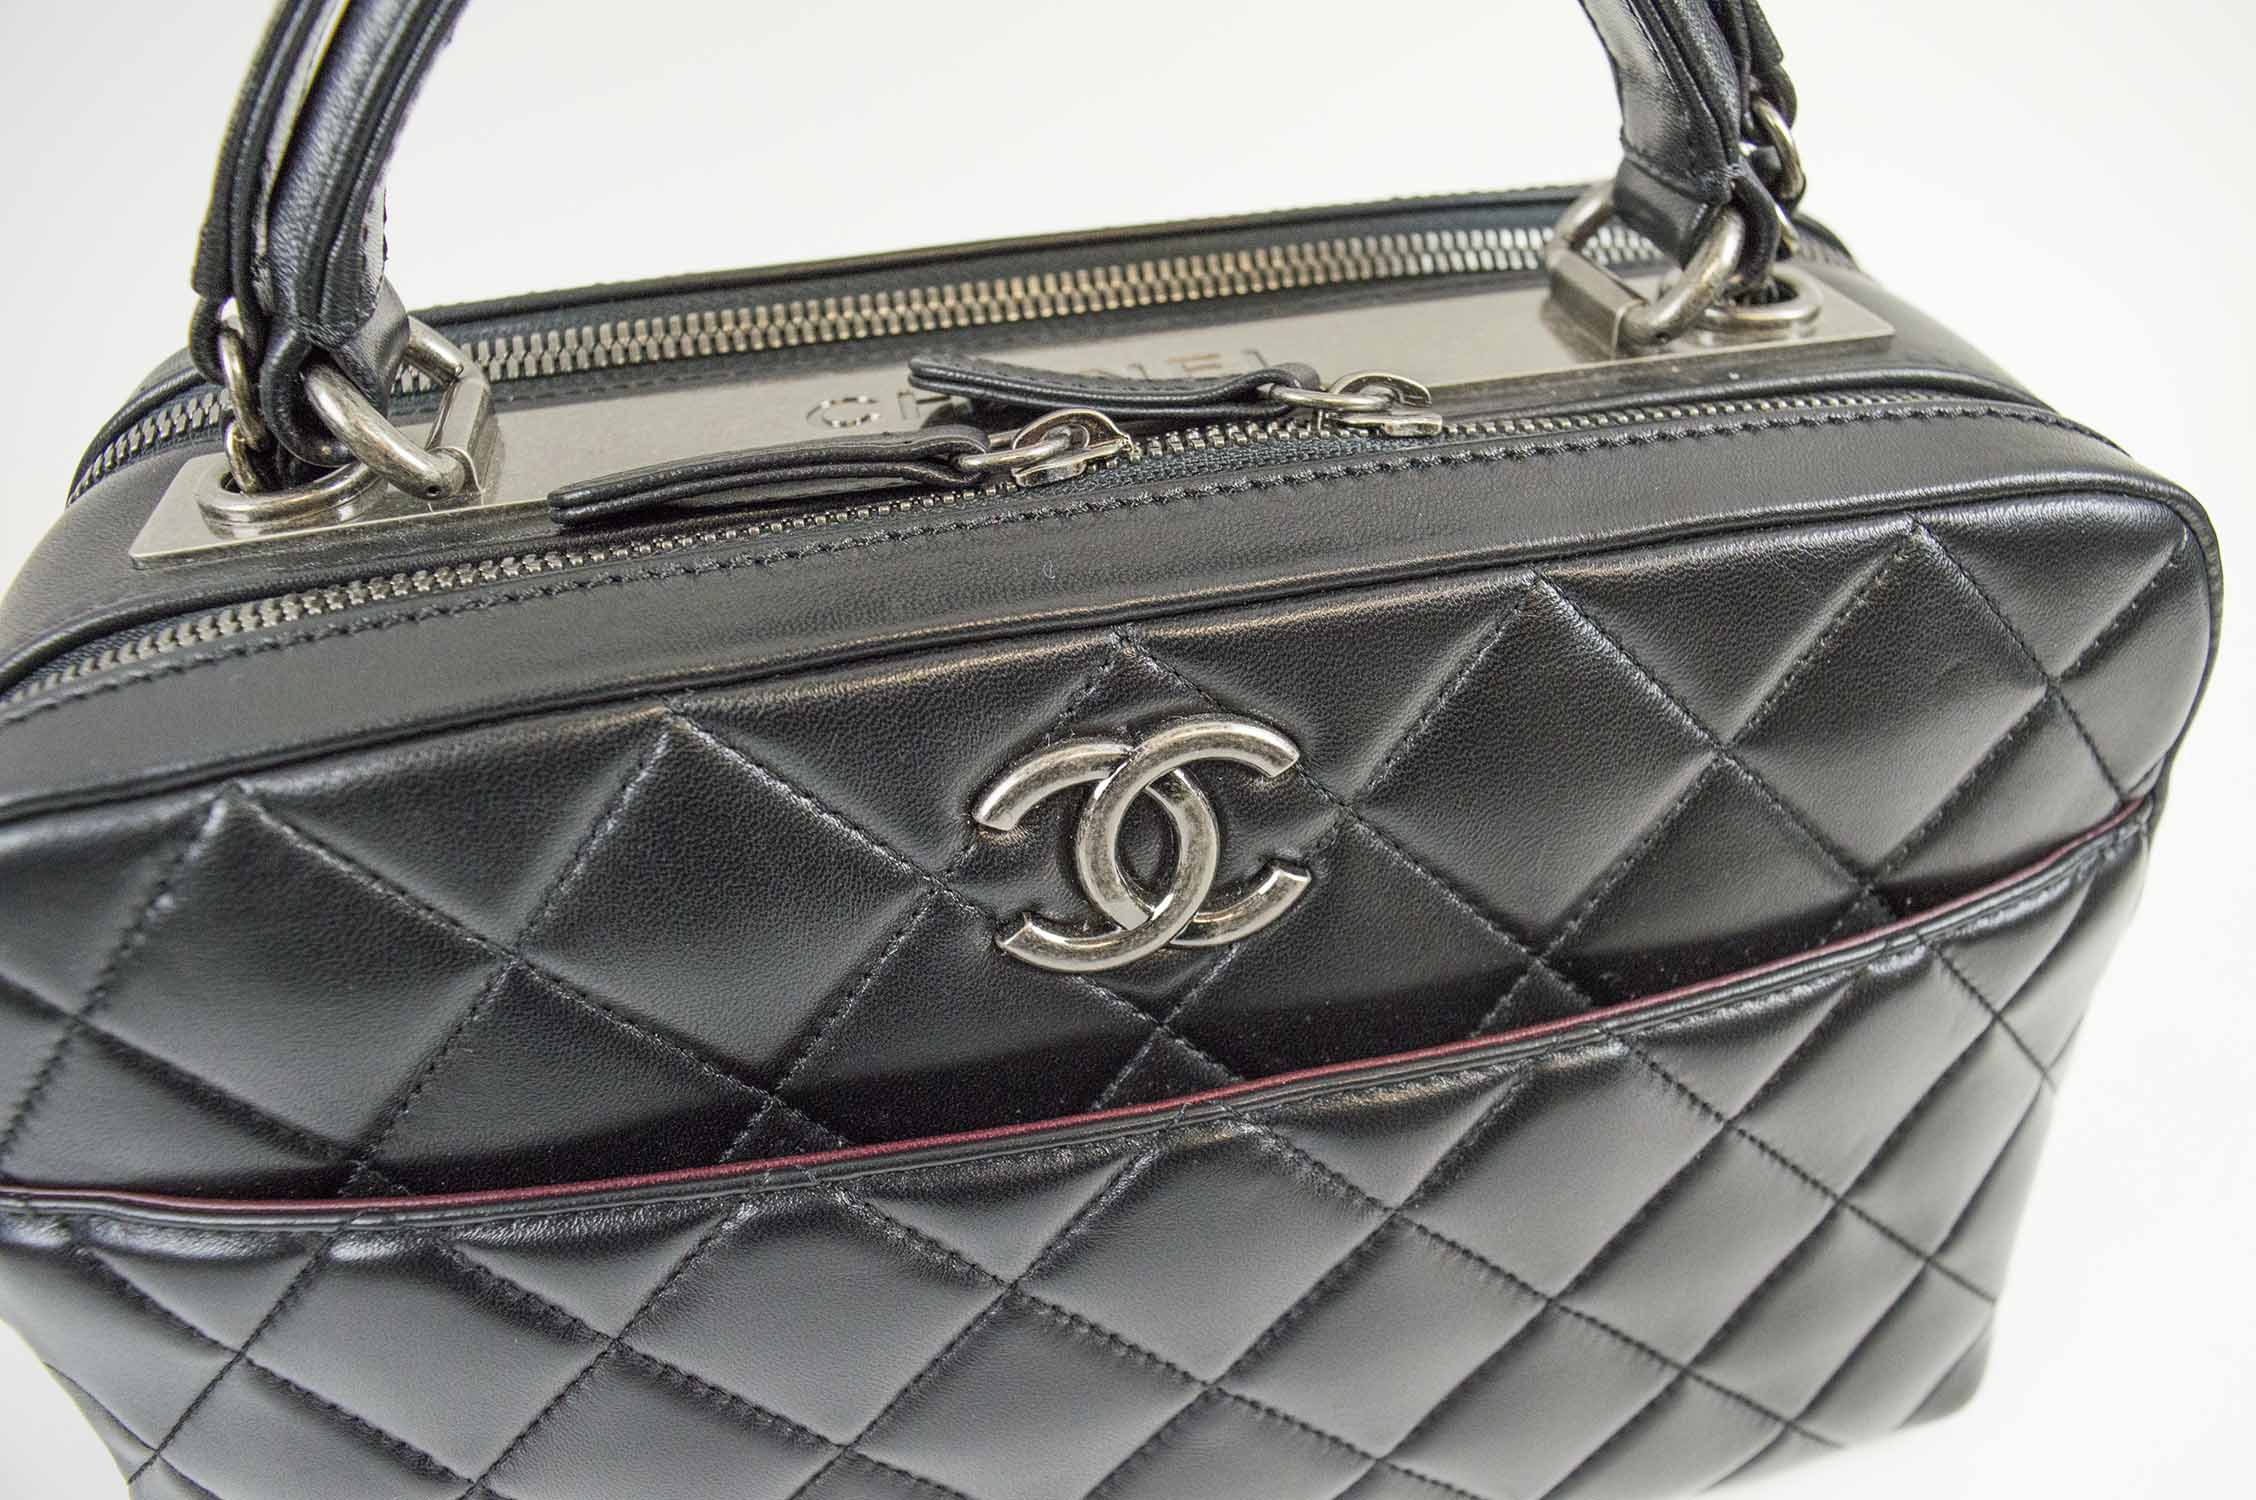 CHANEL, Bags, Chanel Embossed Logo Quilted Bowler Handbag